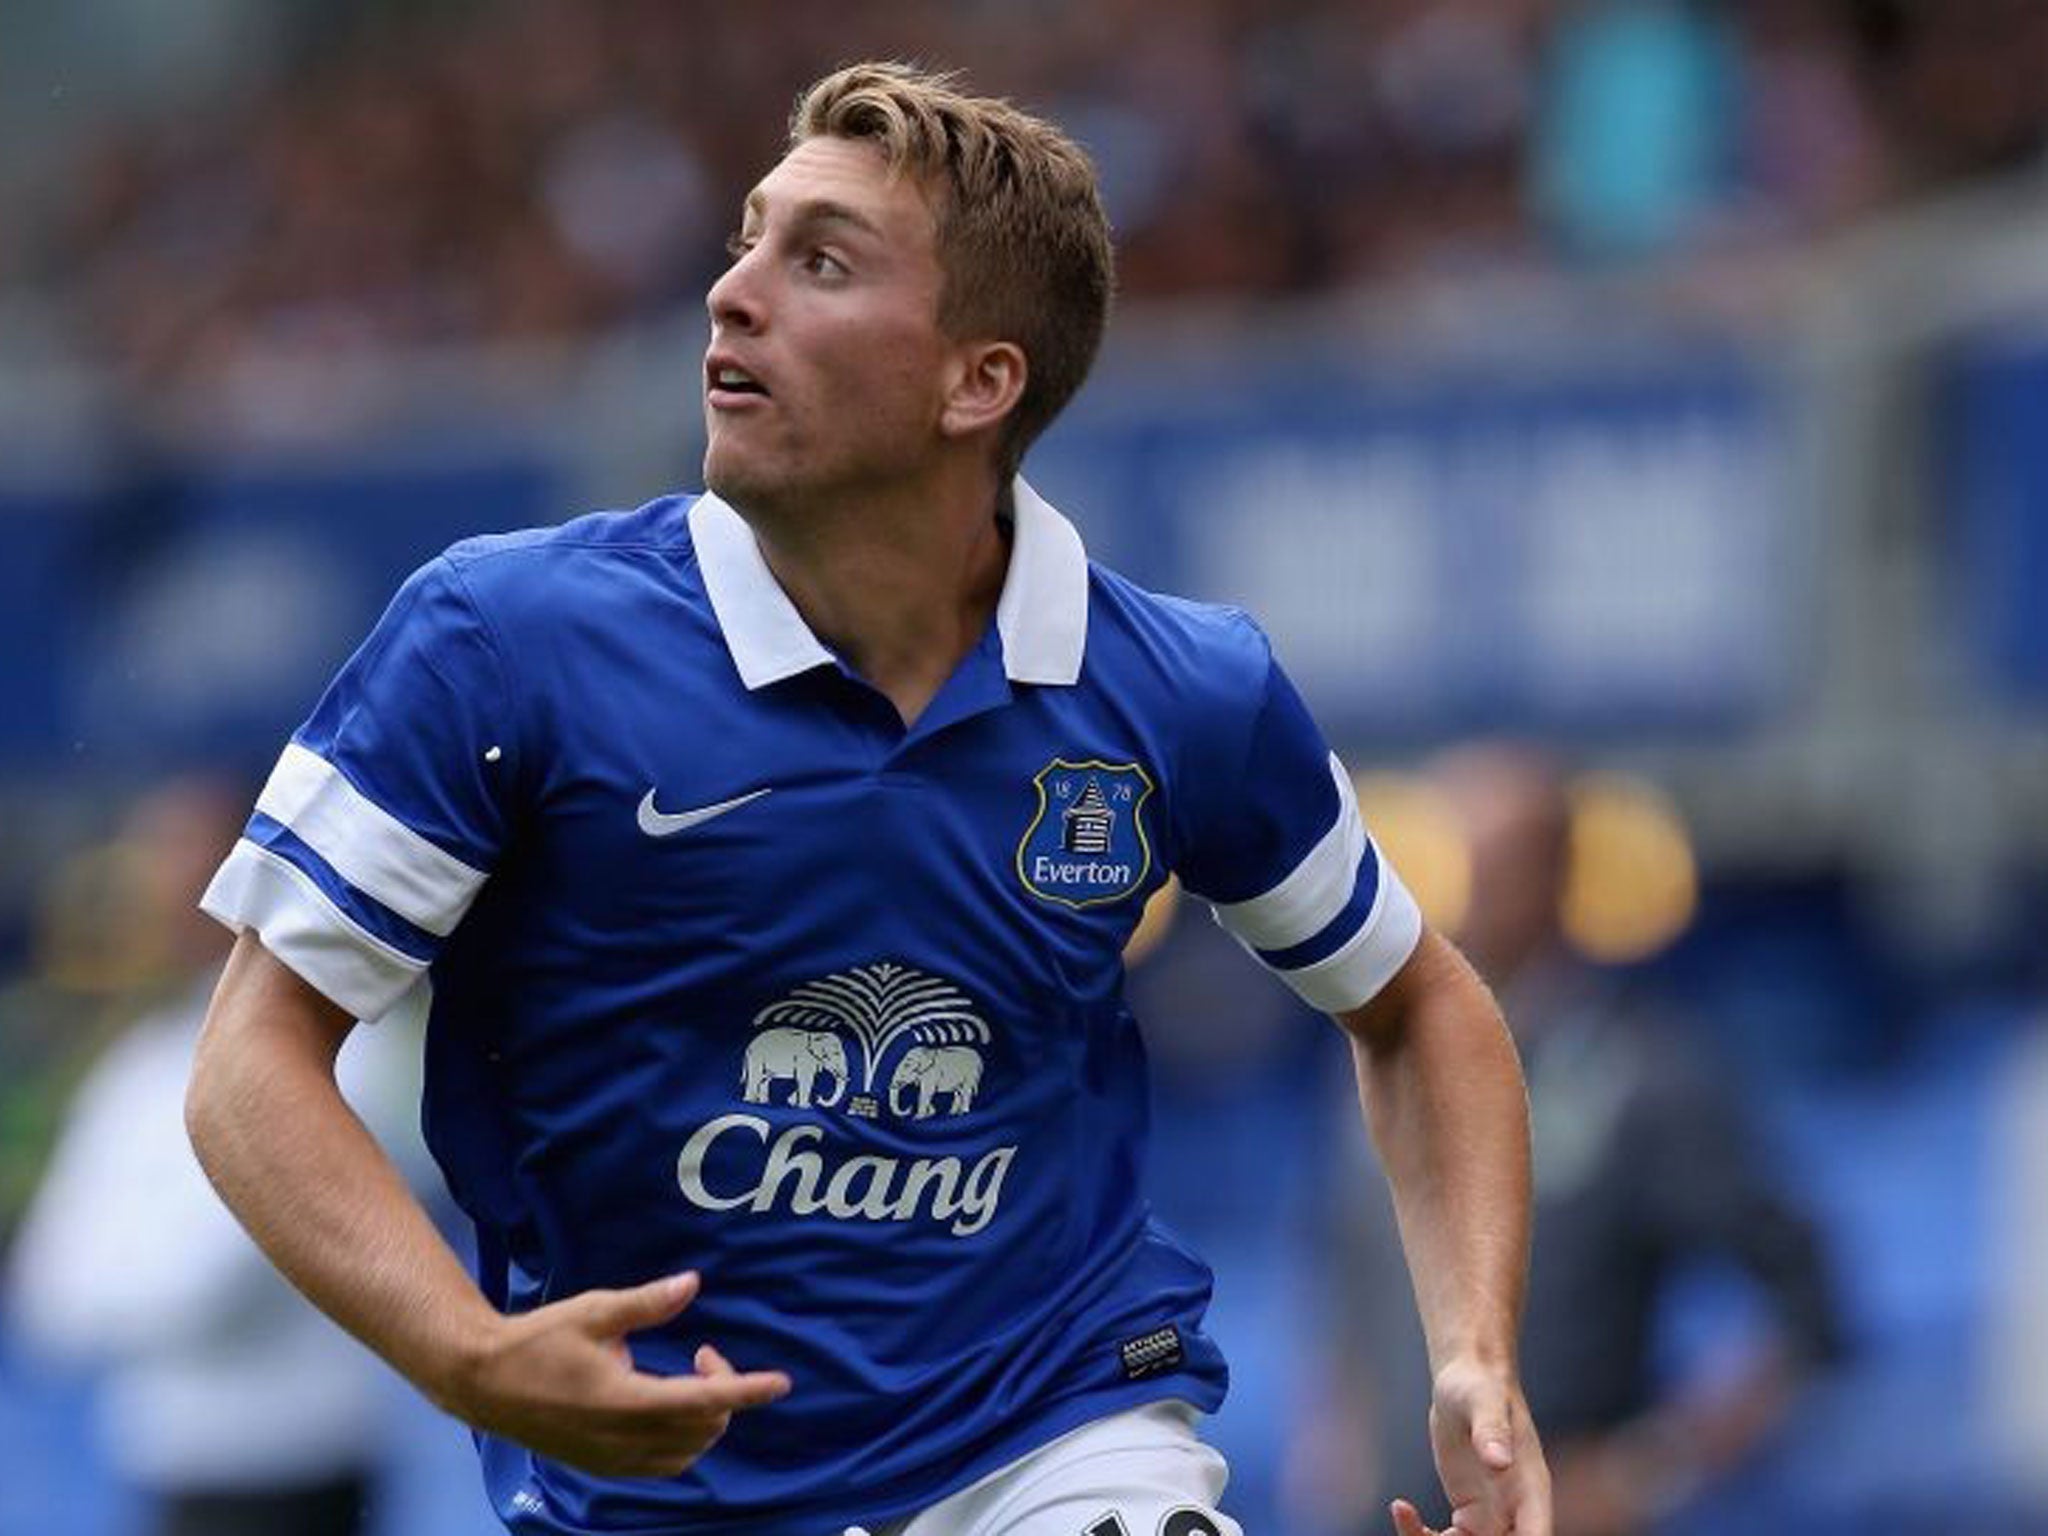 English lesson: The hope is that Gerard Deulofeu will improve by competing in a strong Premier League against good defenders